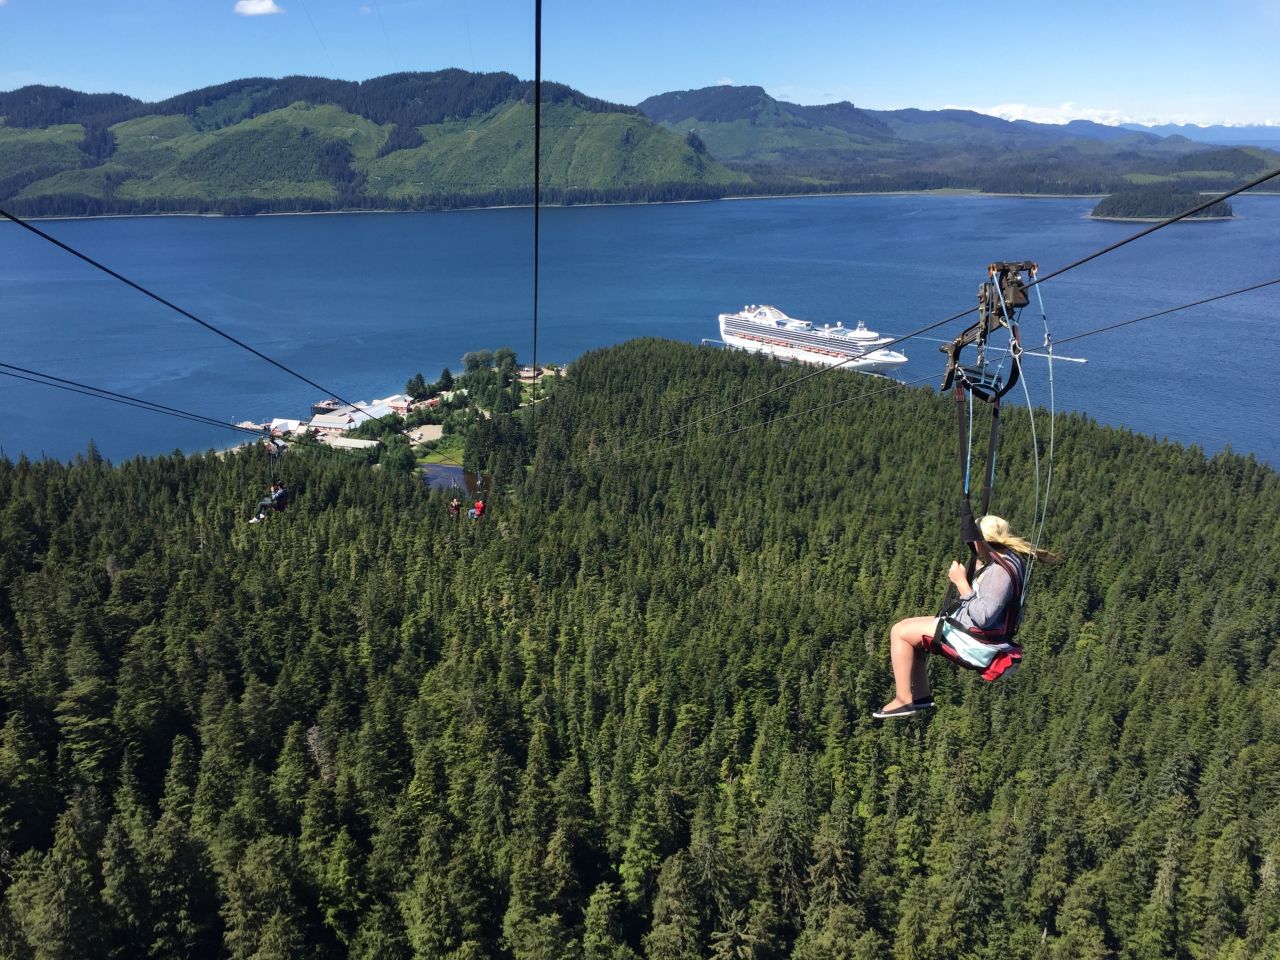 <strong>World's coolest zip lines:</strong> In coastal Alaska, adventurers can enjoy the zip wire at Icy Strait Point, featuring six cables side by side, with an average speed of 60 mph -- and stunning views.